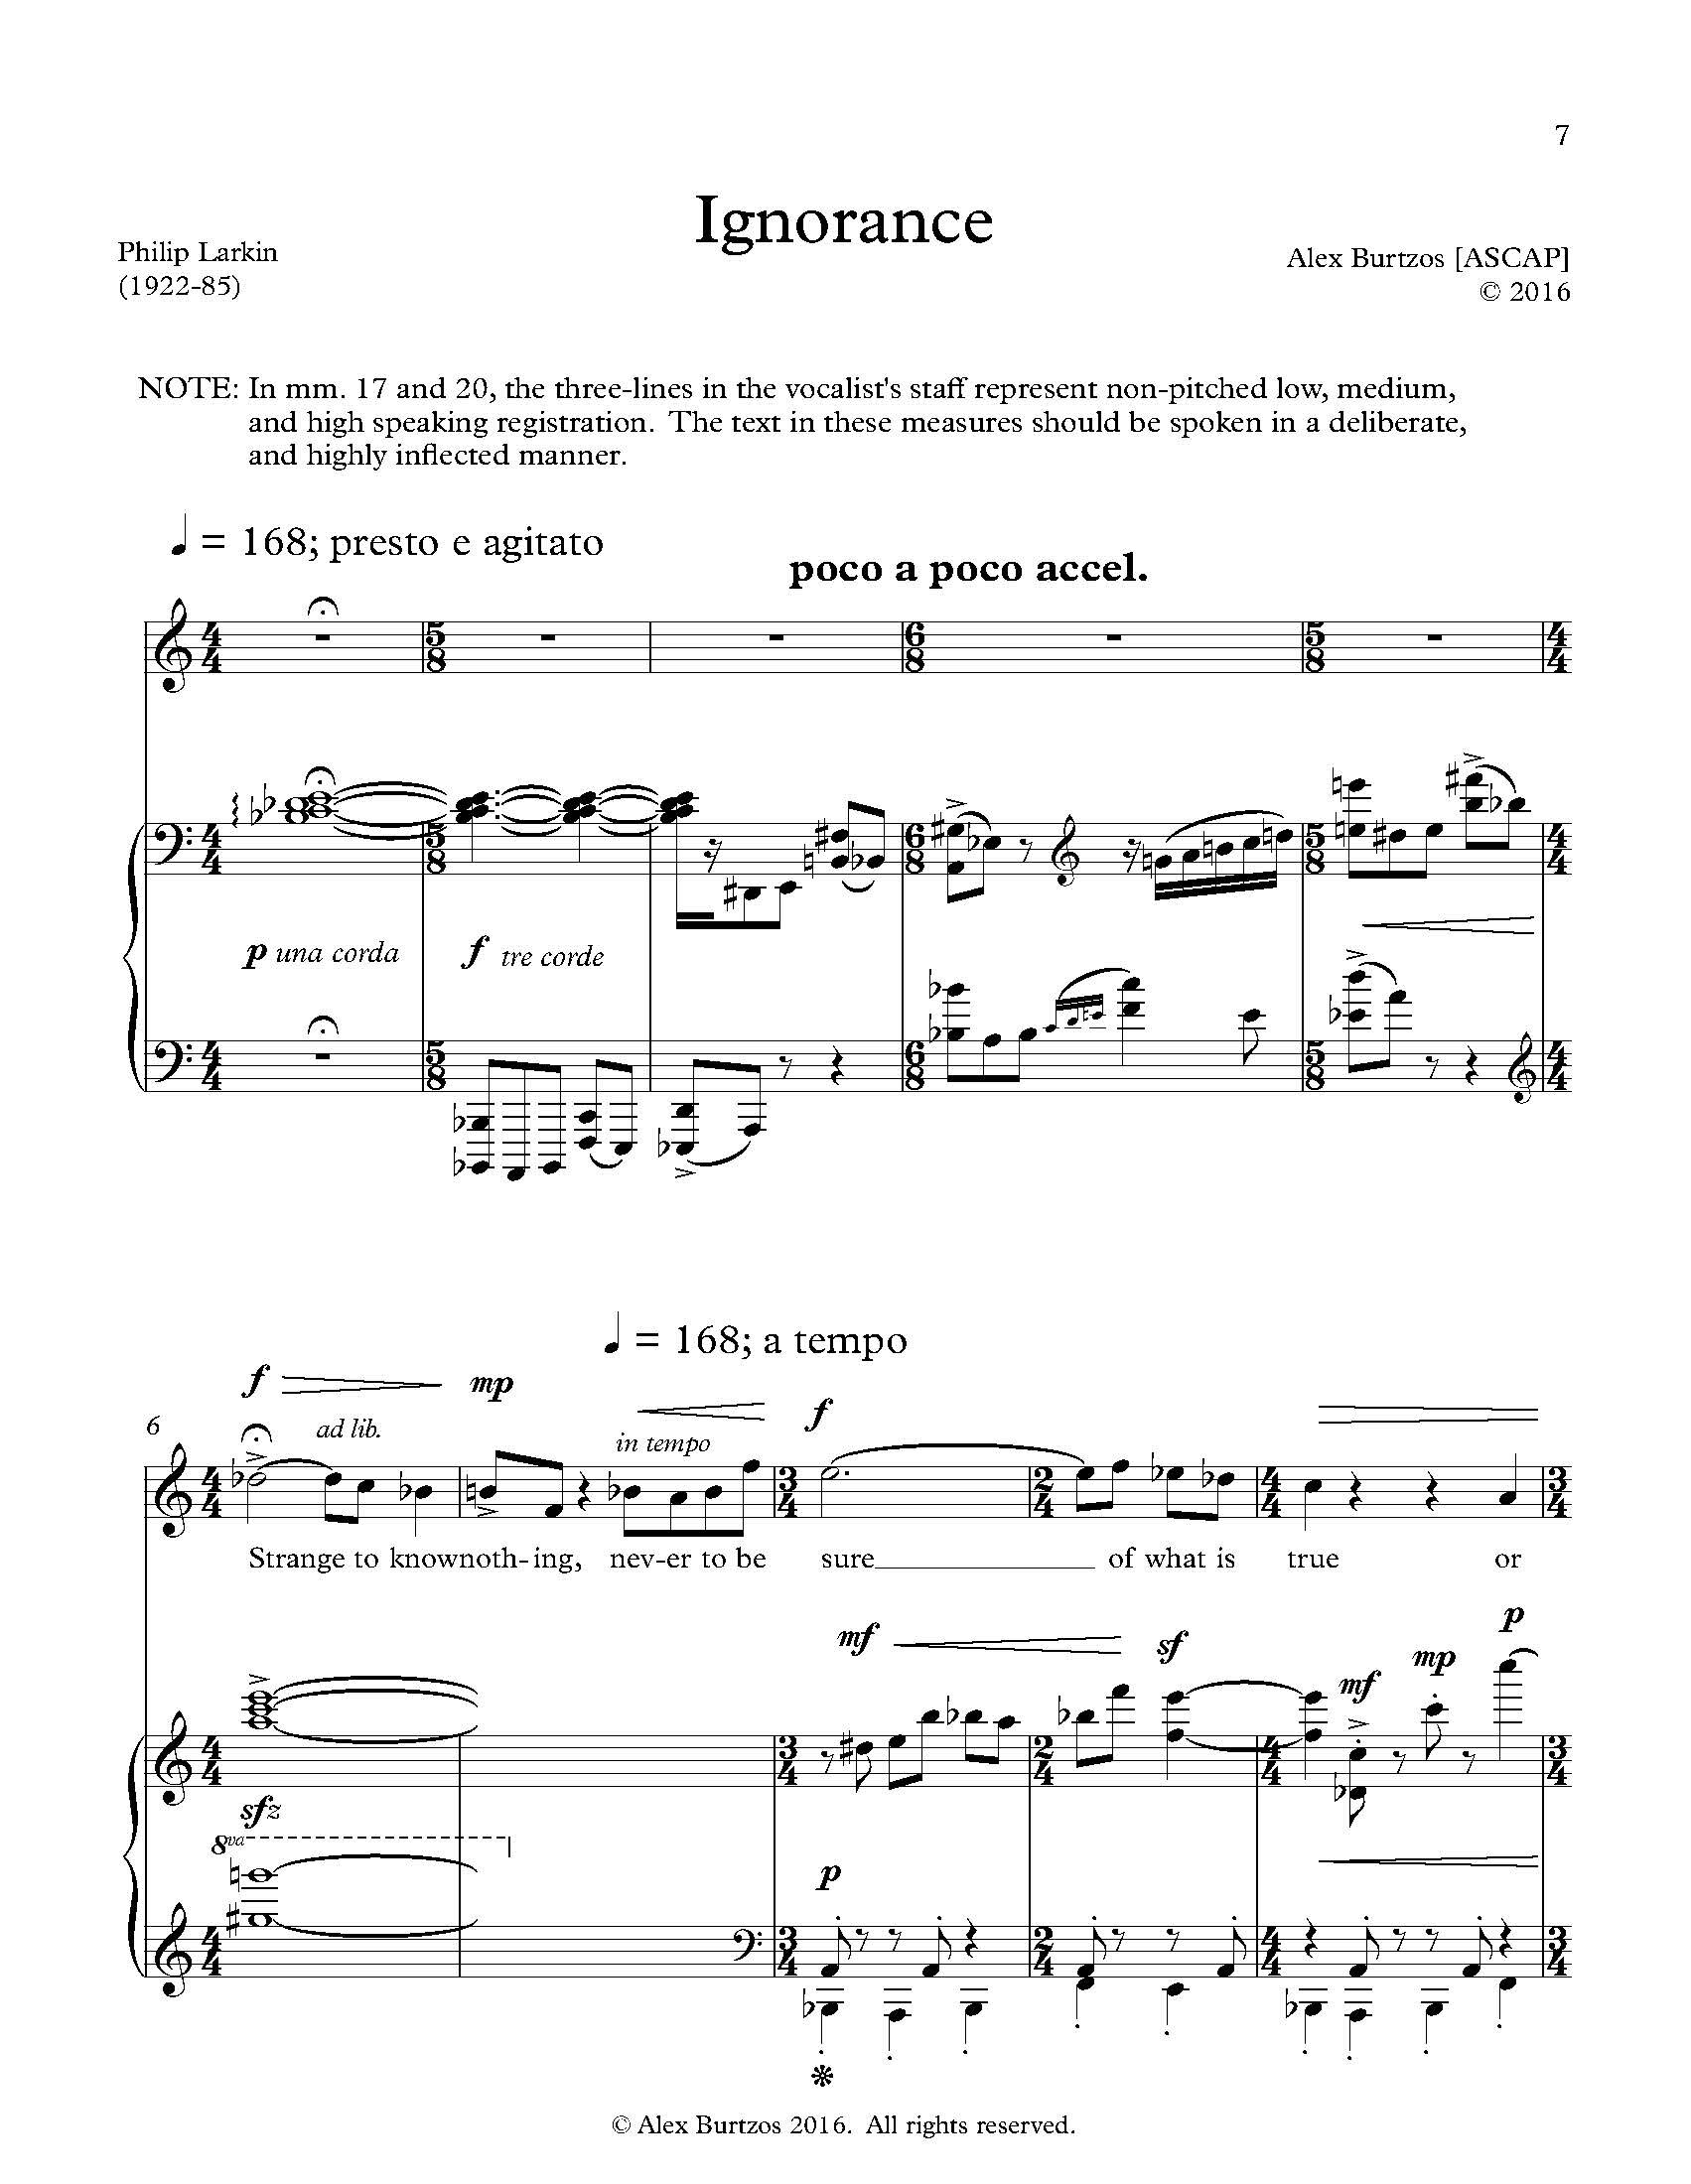 The Explosion - Complete Score_Page_13.jpg